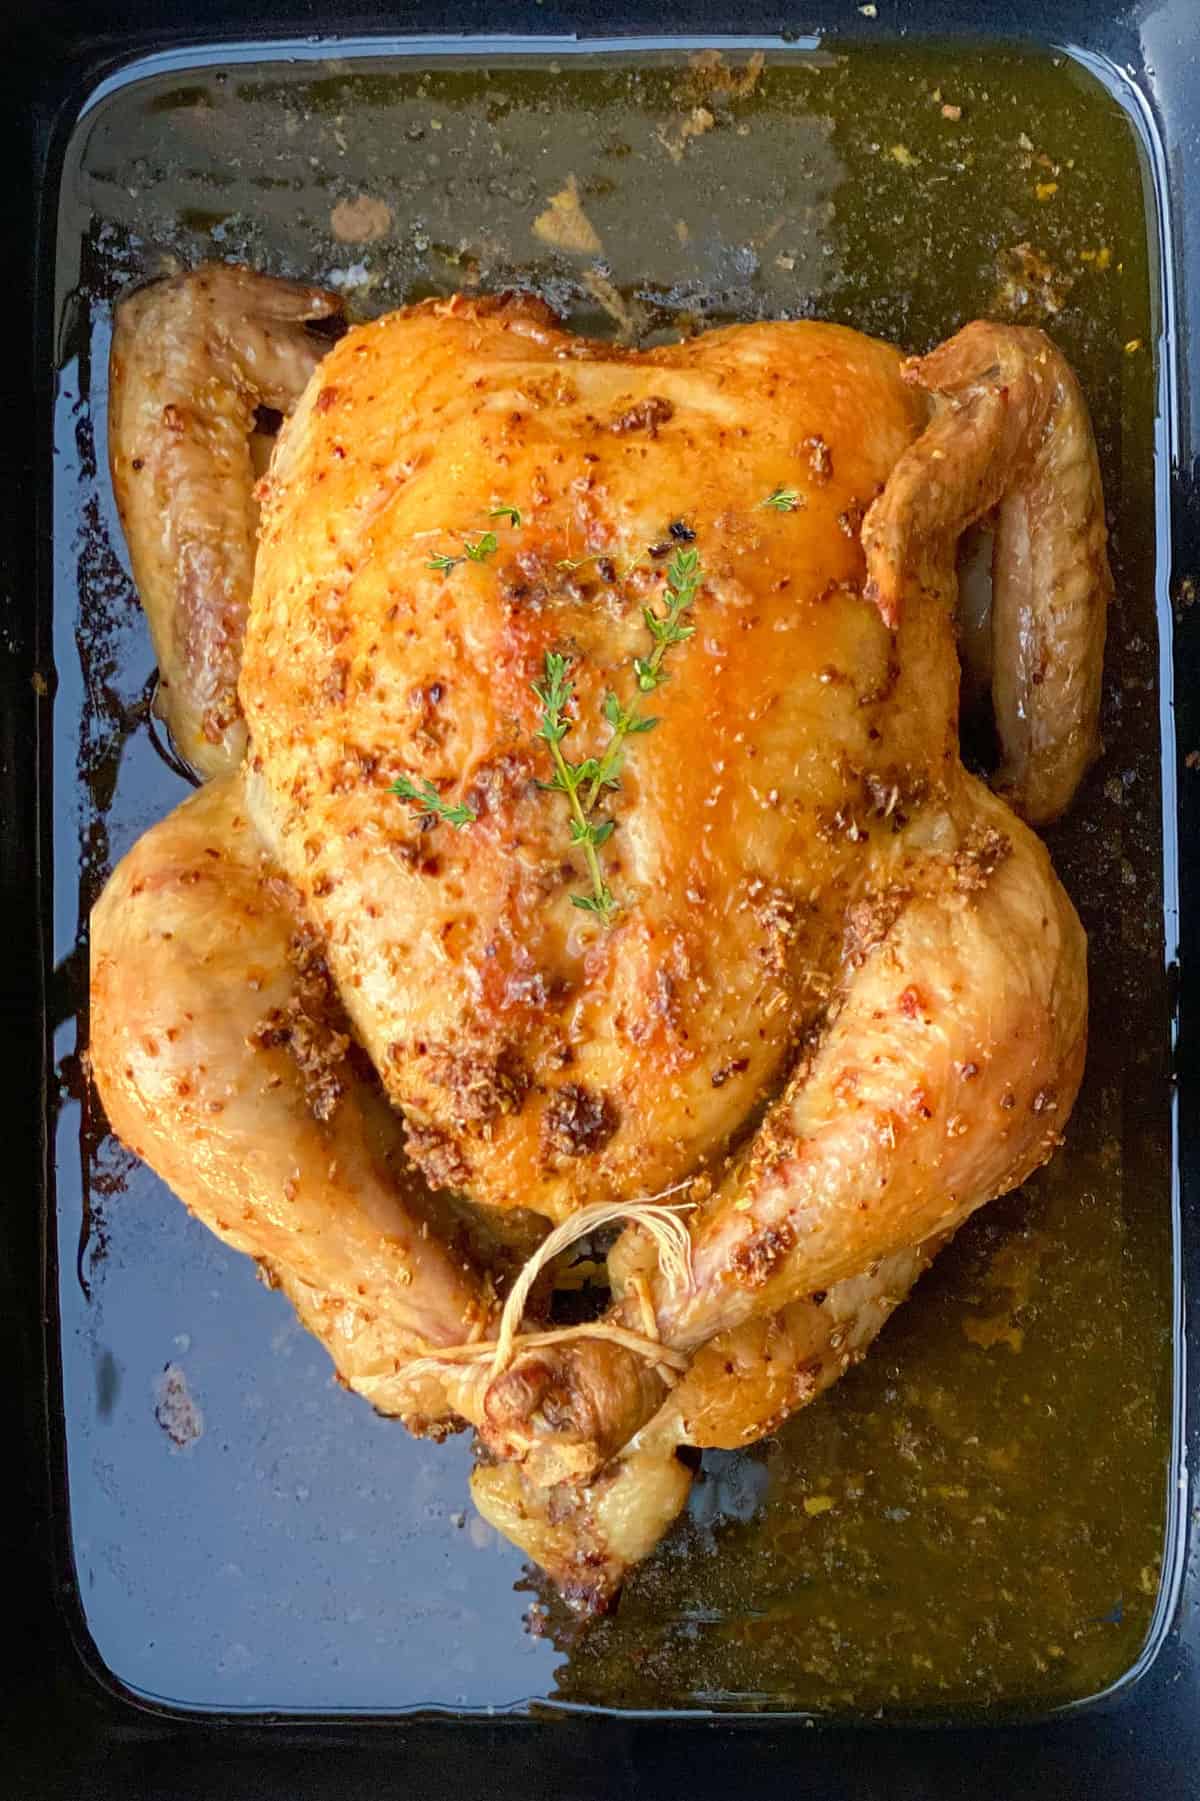 The Secret to Making Perfect Chicken Every Time